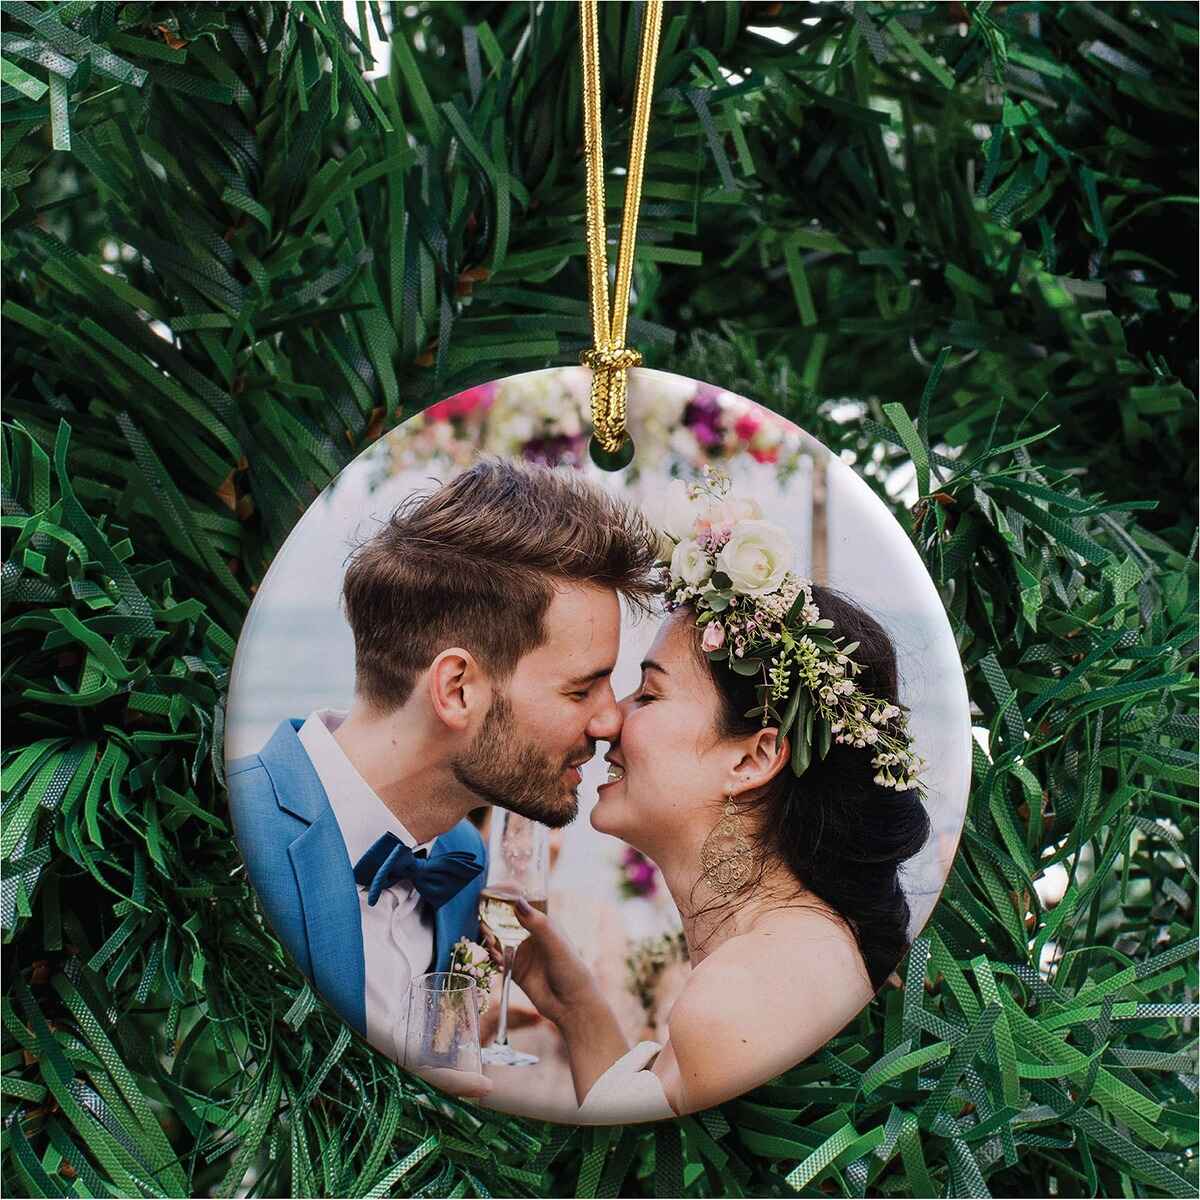 How To Make An Ornament With A Picture In It